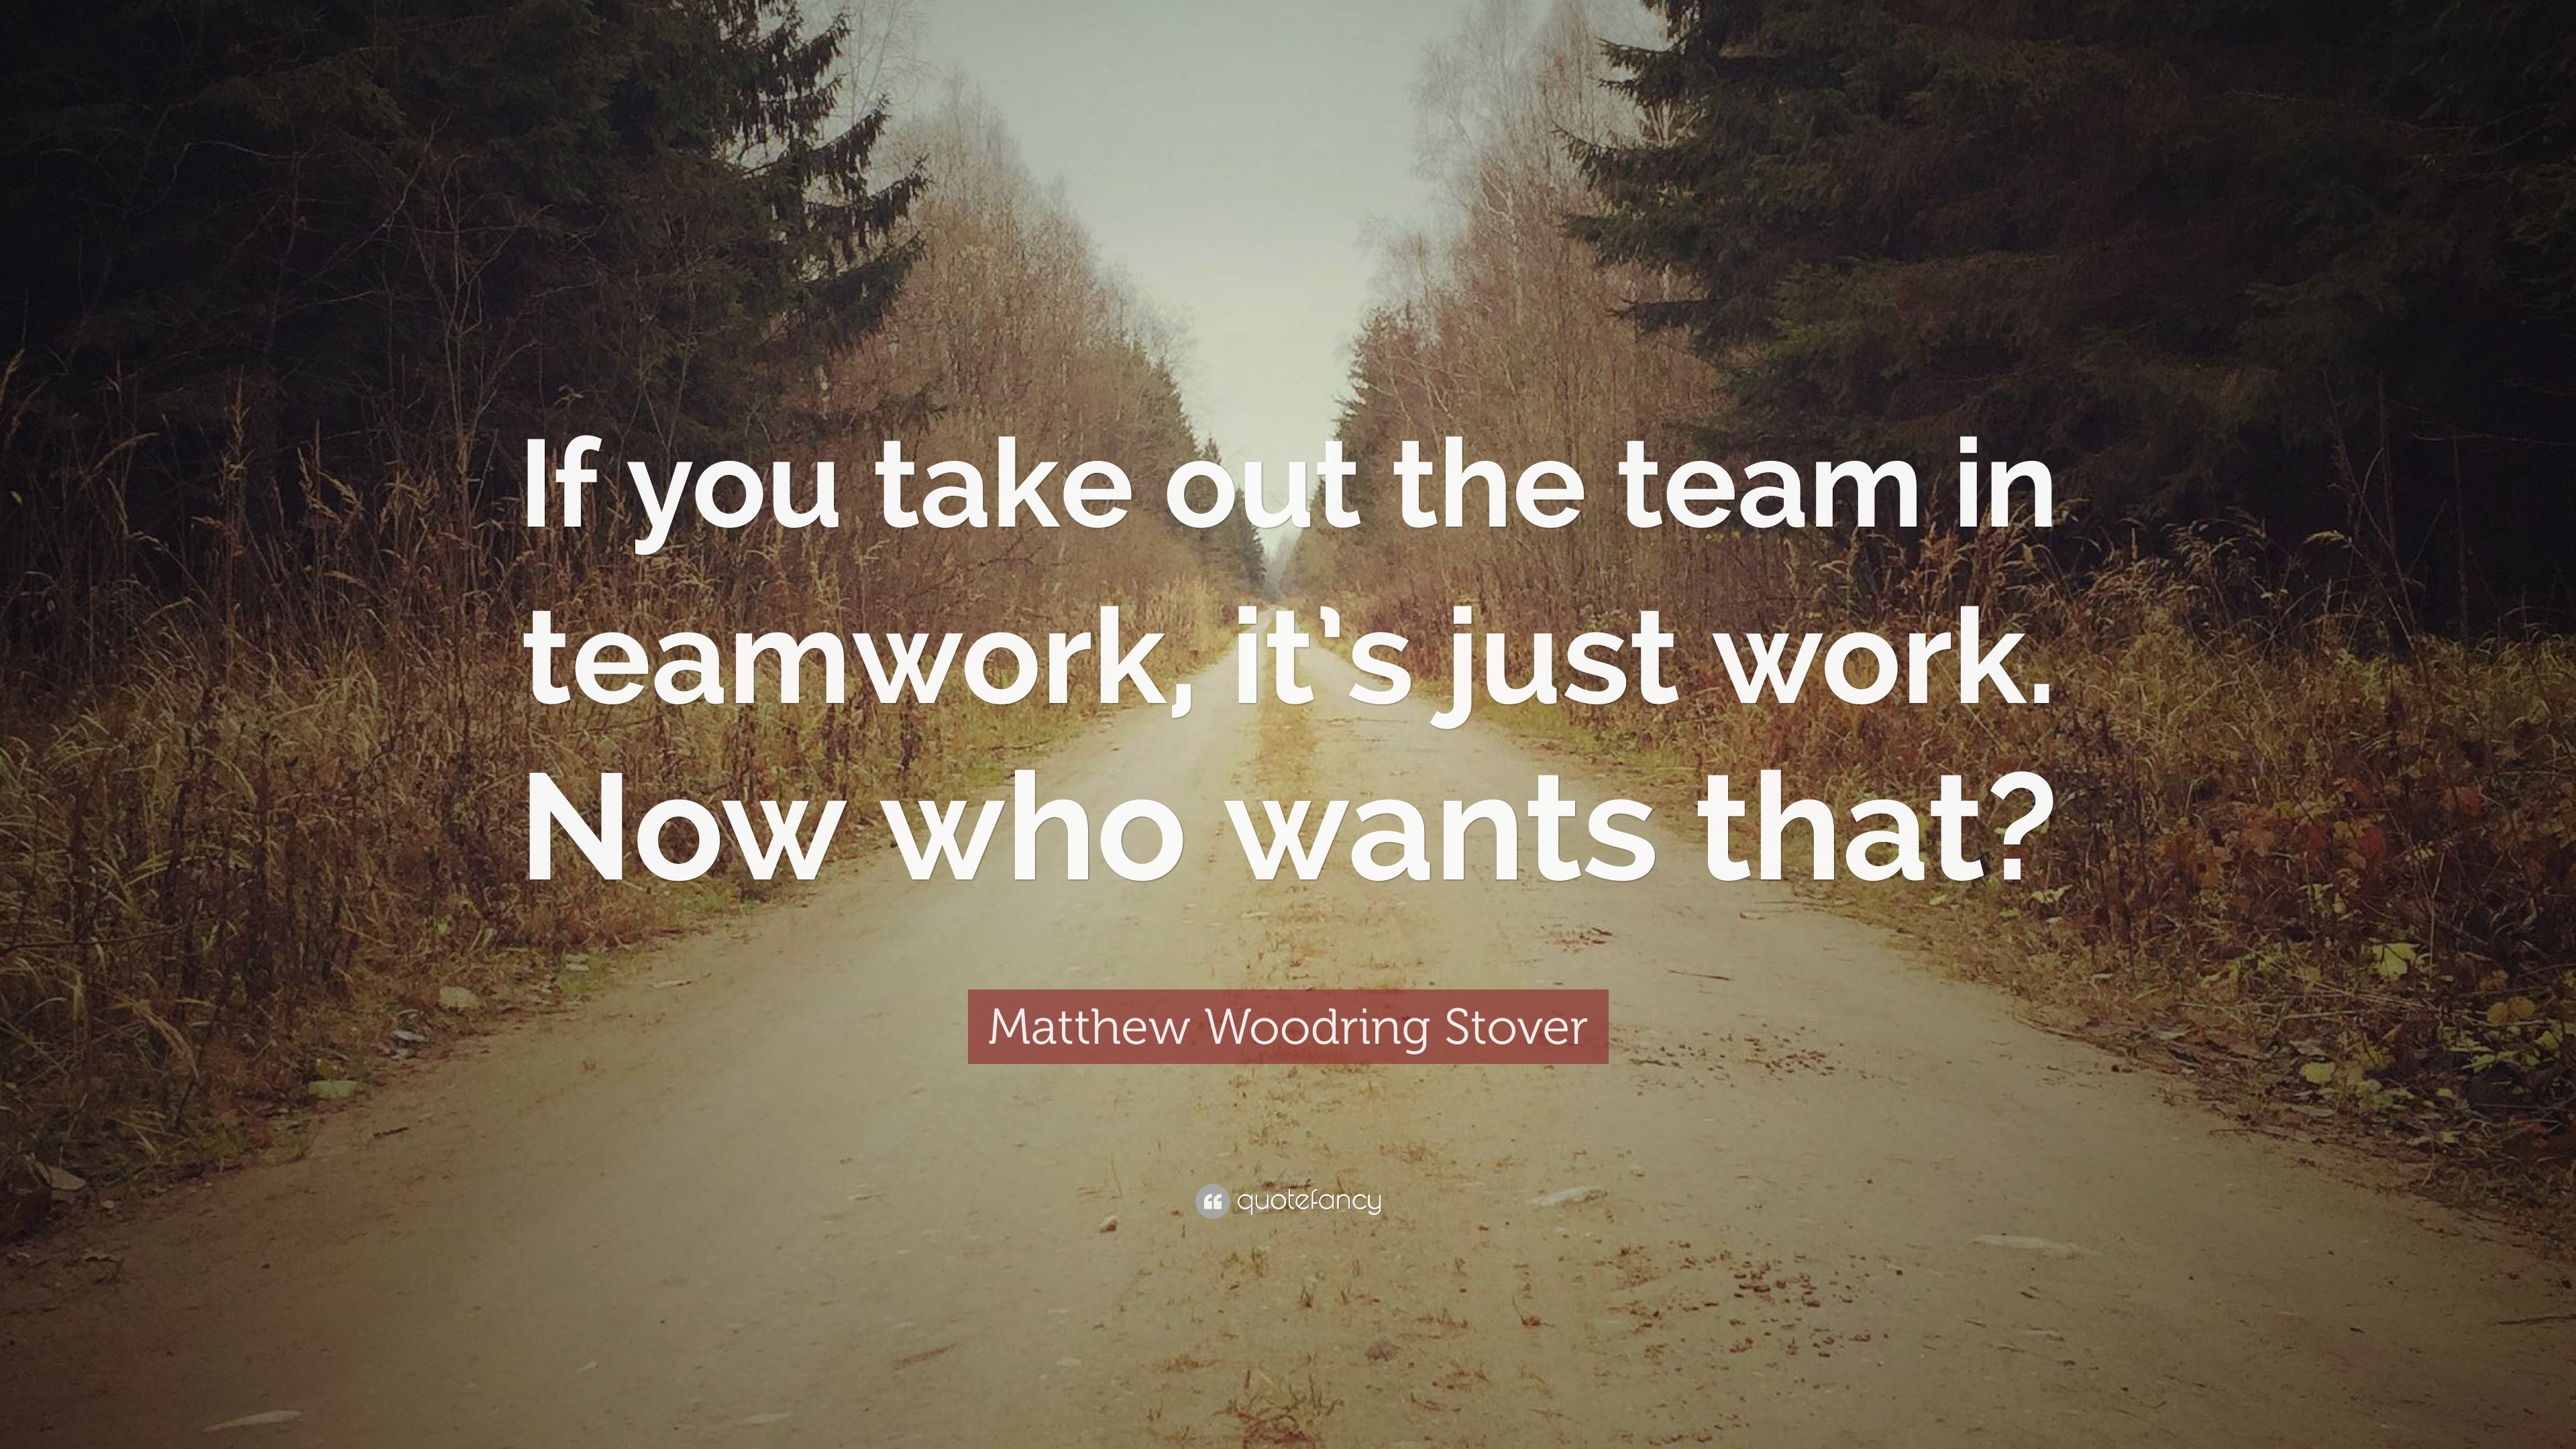 Teamwork Quotes For The Workplace